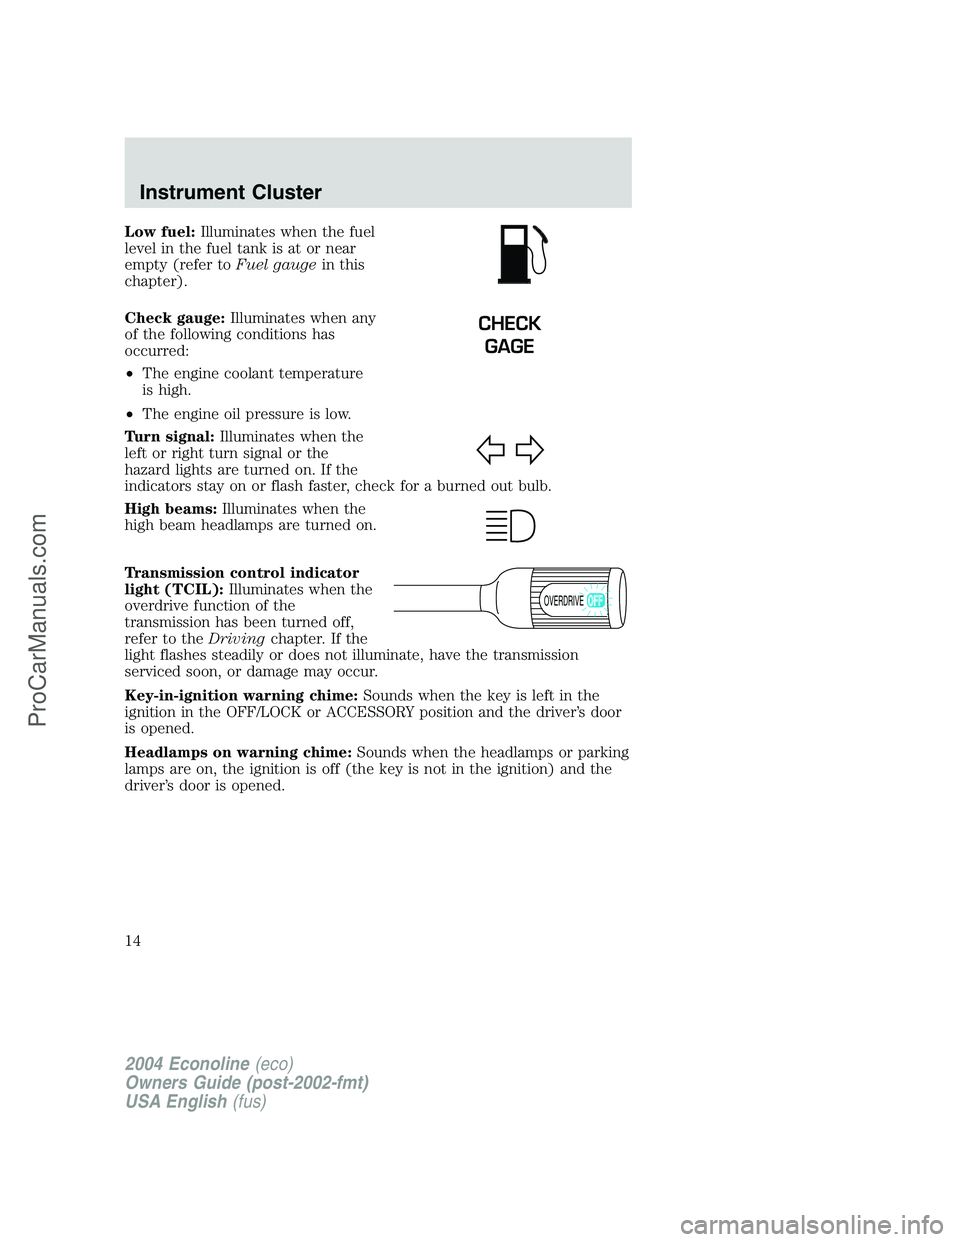 FORD E-350 2004 User Guide Low fuel:Illuminates when the fuel
level in the fuel tank is at or near
empty (refer toFuel gaugein this
chapter).
Check gauge:Illuminates when any
of the following conditions has
occurred:
•The eng